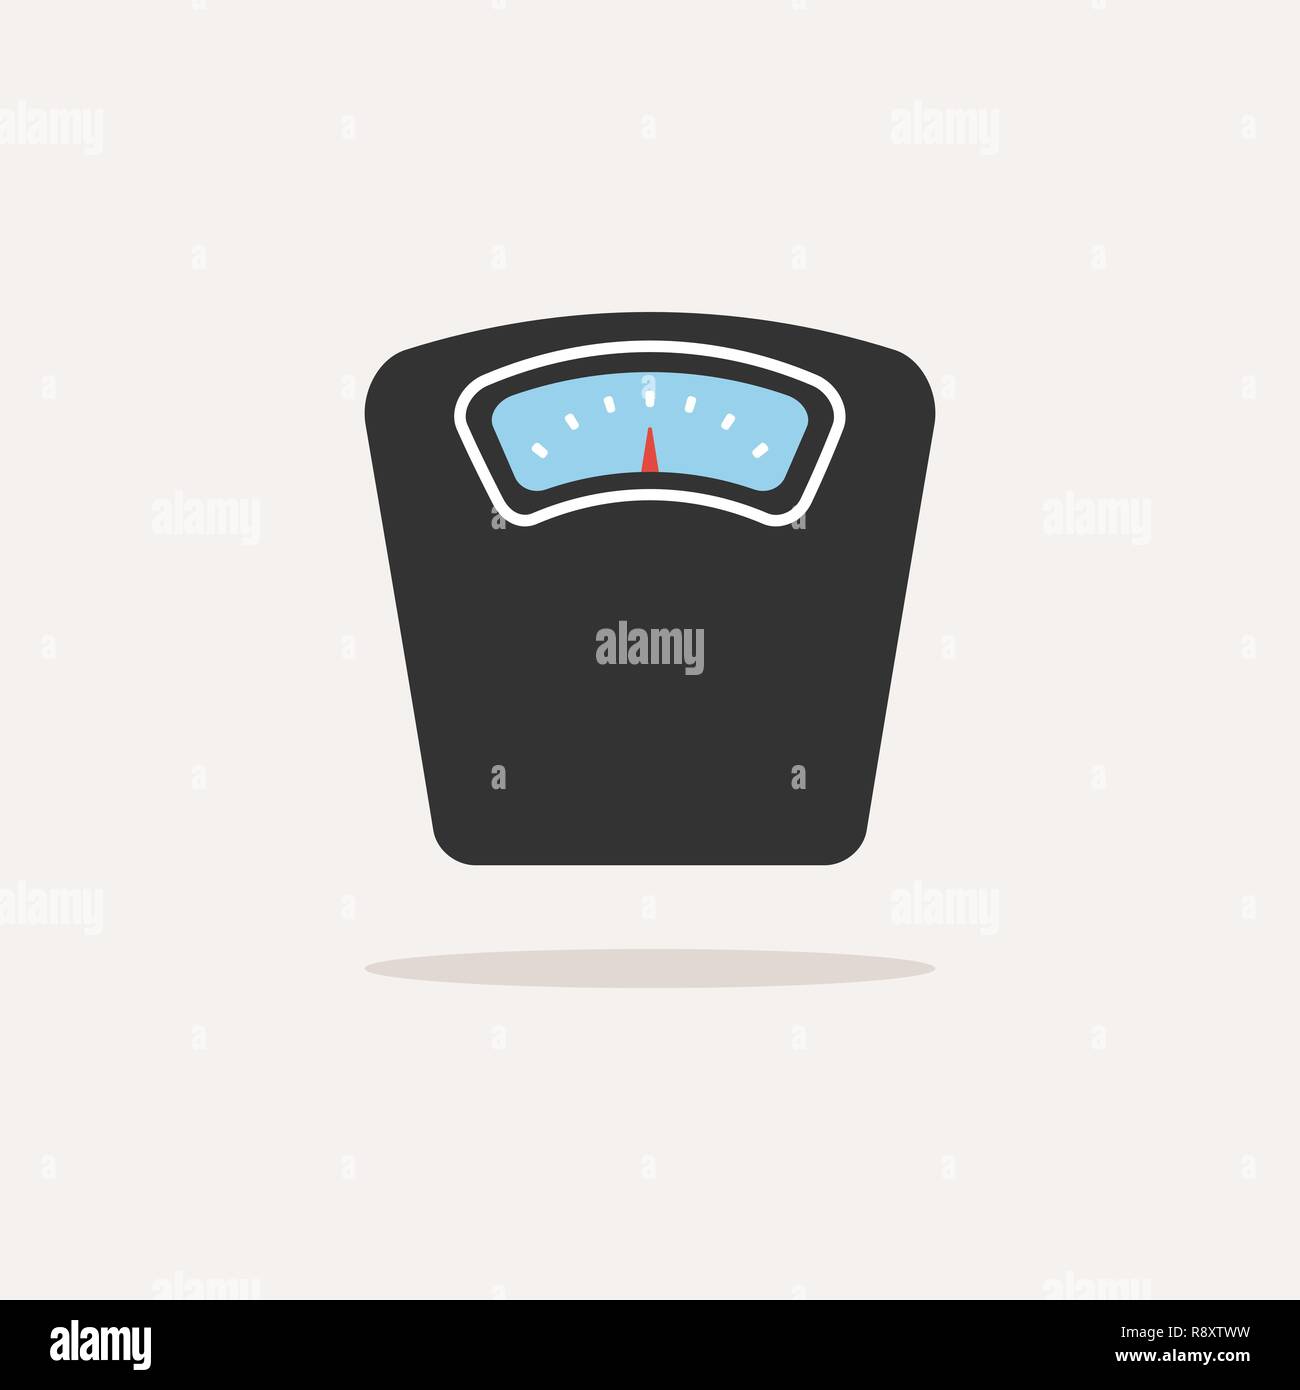 Pink scale stock vector. Illustration of obesity, bathroom - 21961635